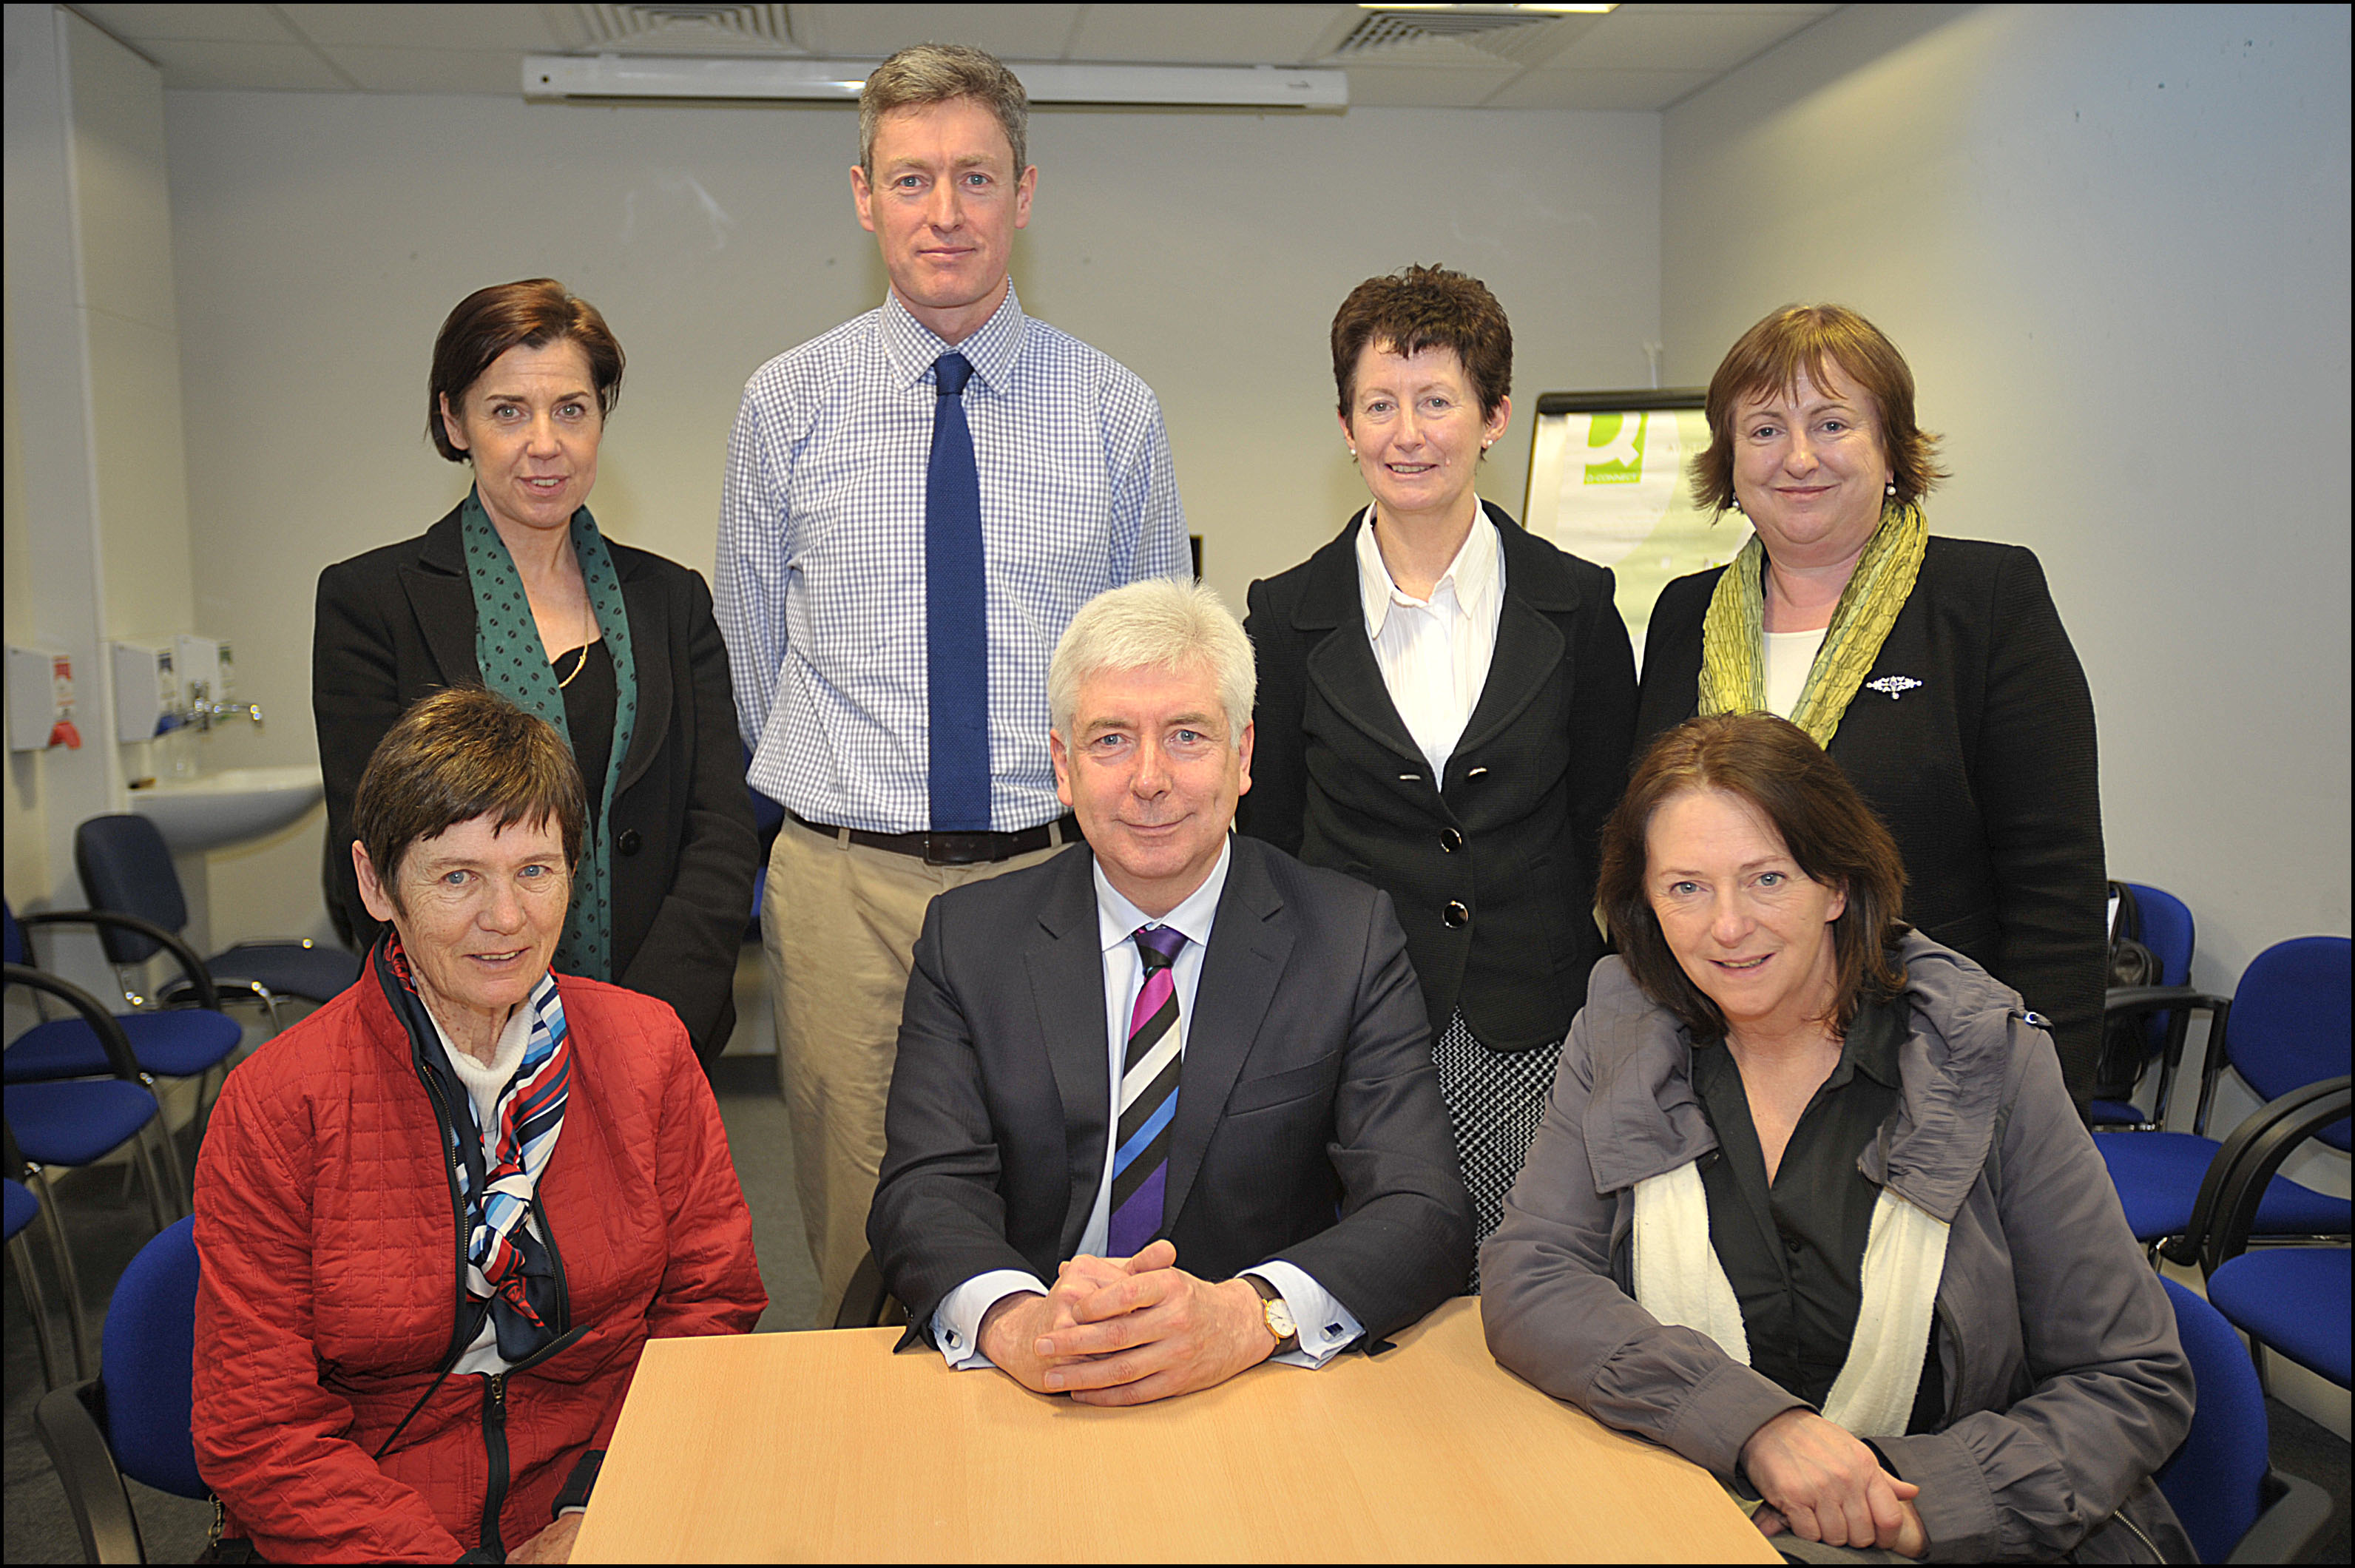 Alex White TD, Cllr. Lettie McCarthy, Martina Queally, Dr. Colm Smyth, Teresa OMahony and  Deirdre Ryan at the Leopardstown Primary Care Centre 